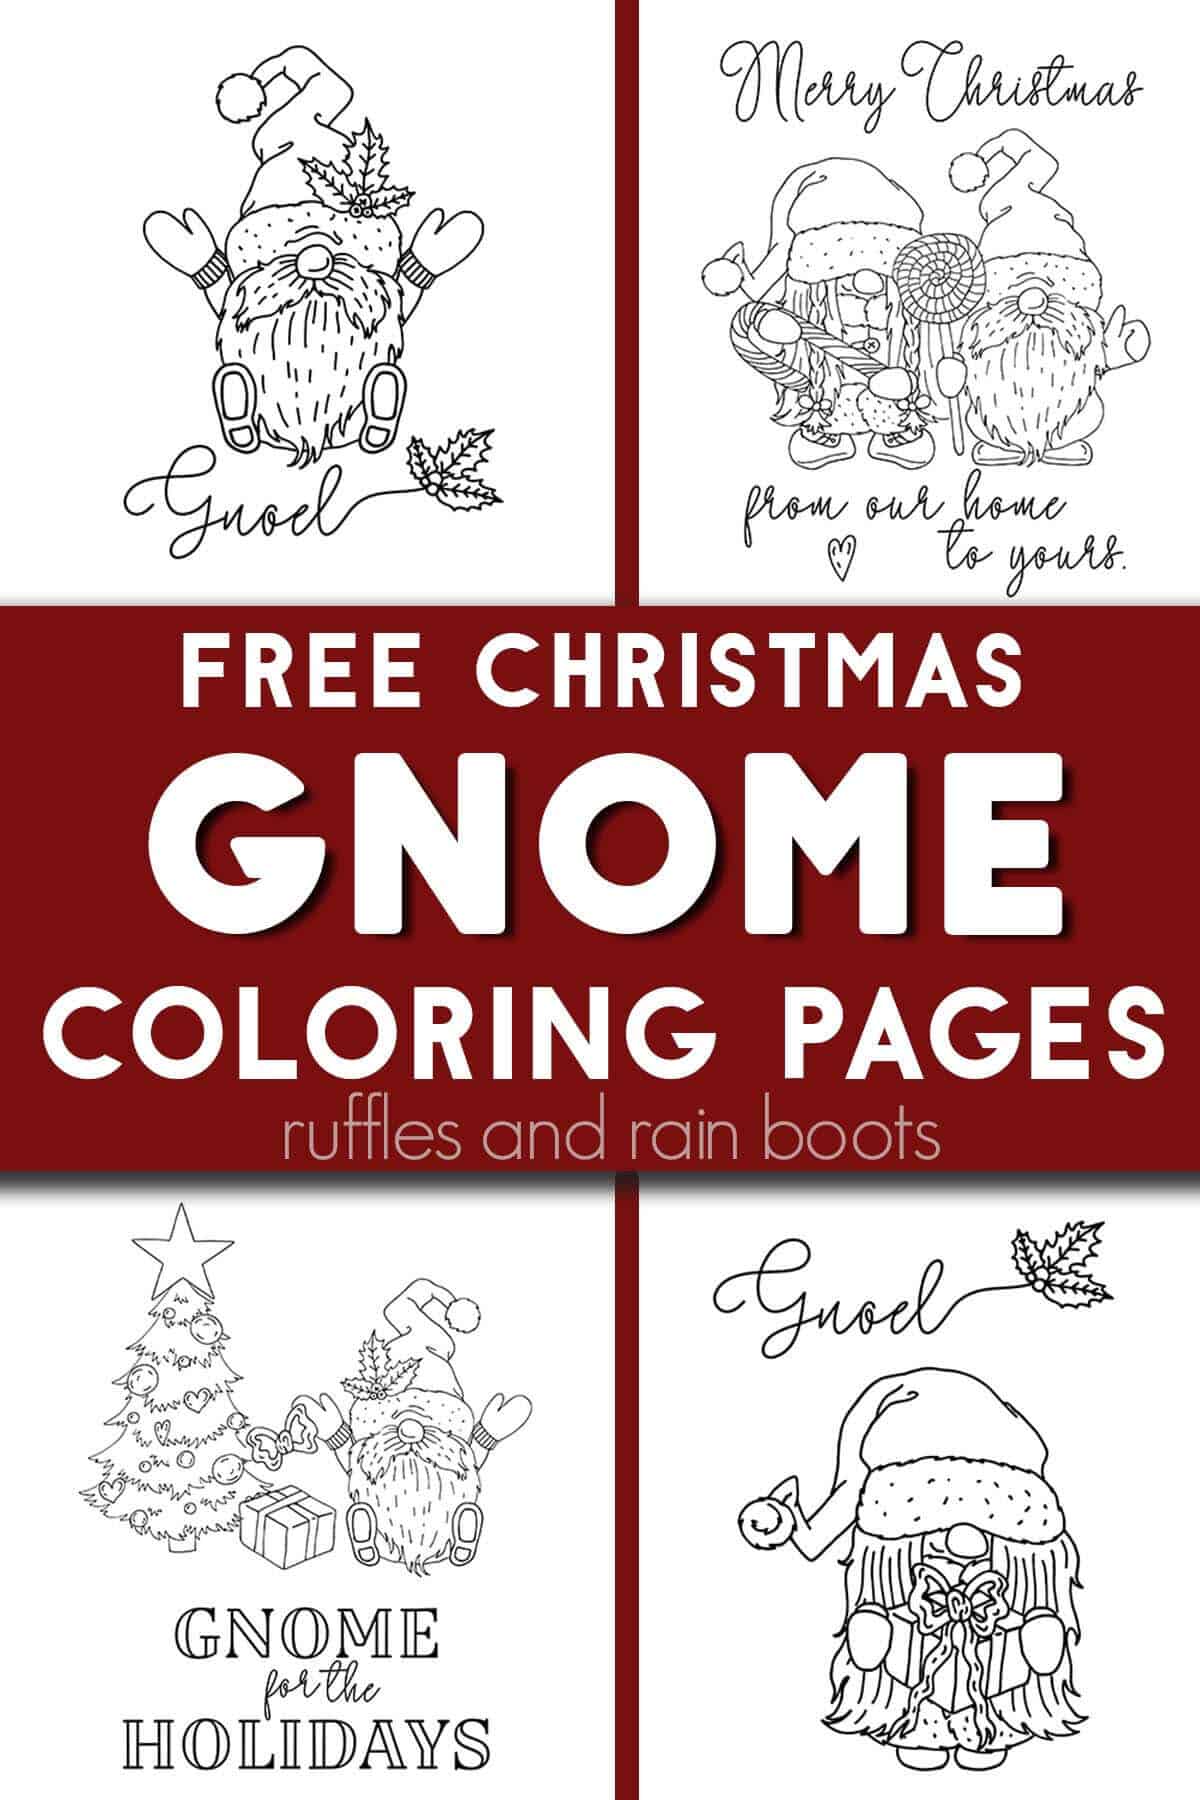 Four image collage of holiday gnome drawings with text which reads free Christmas gnome coloring pages.